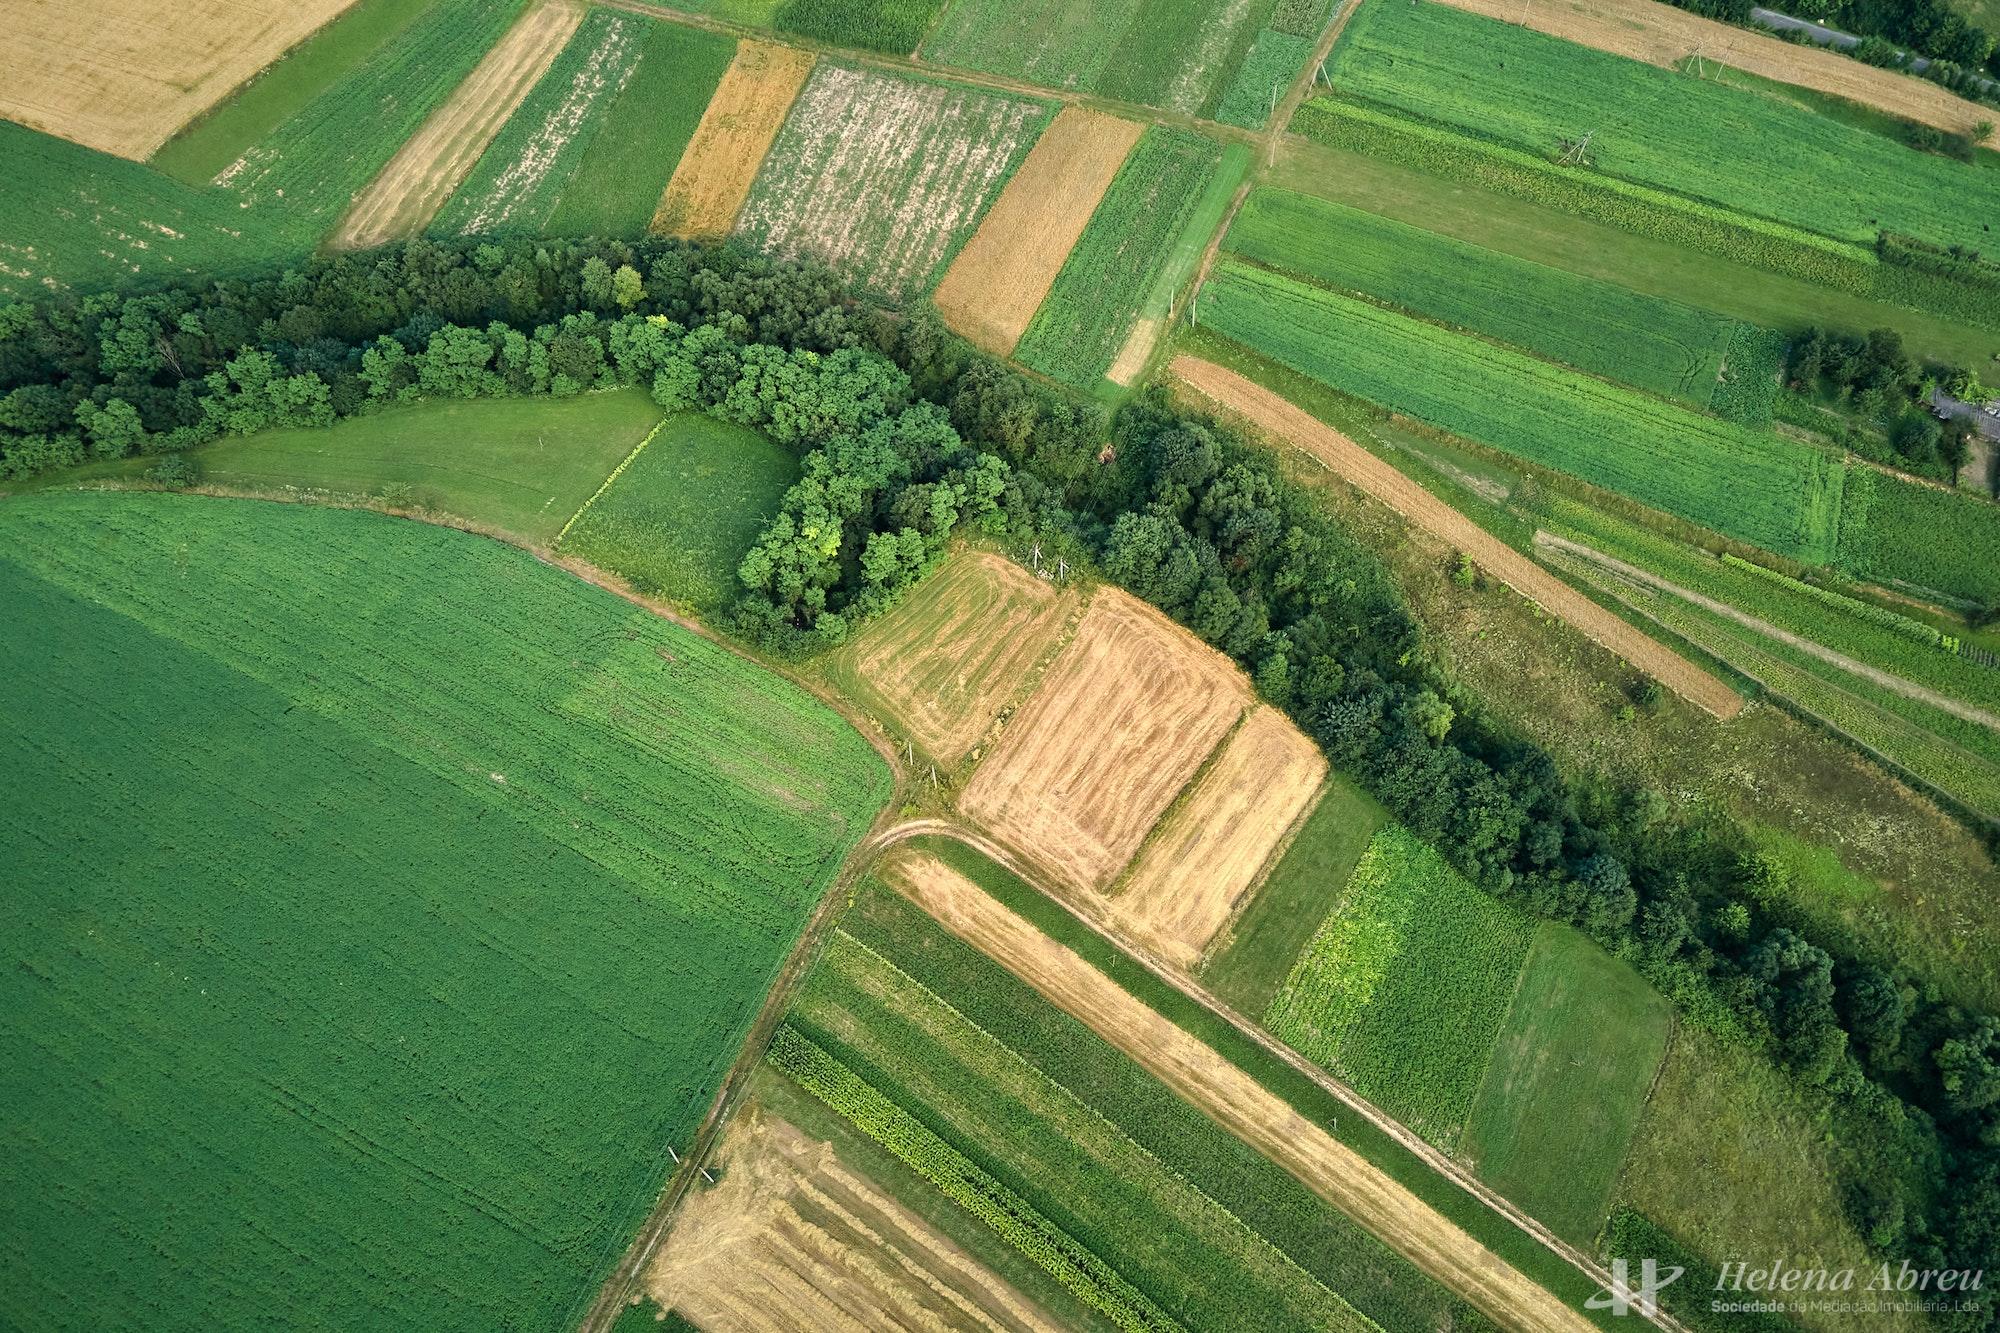 Aerial landscape view of green and yellow cultivated agricultural fields with growing crops